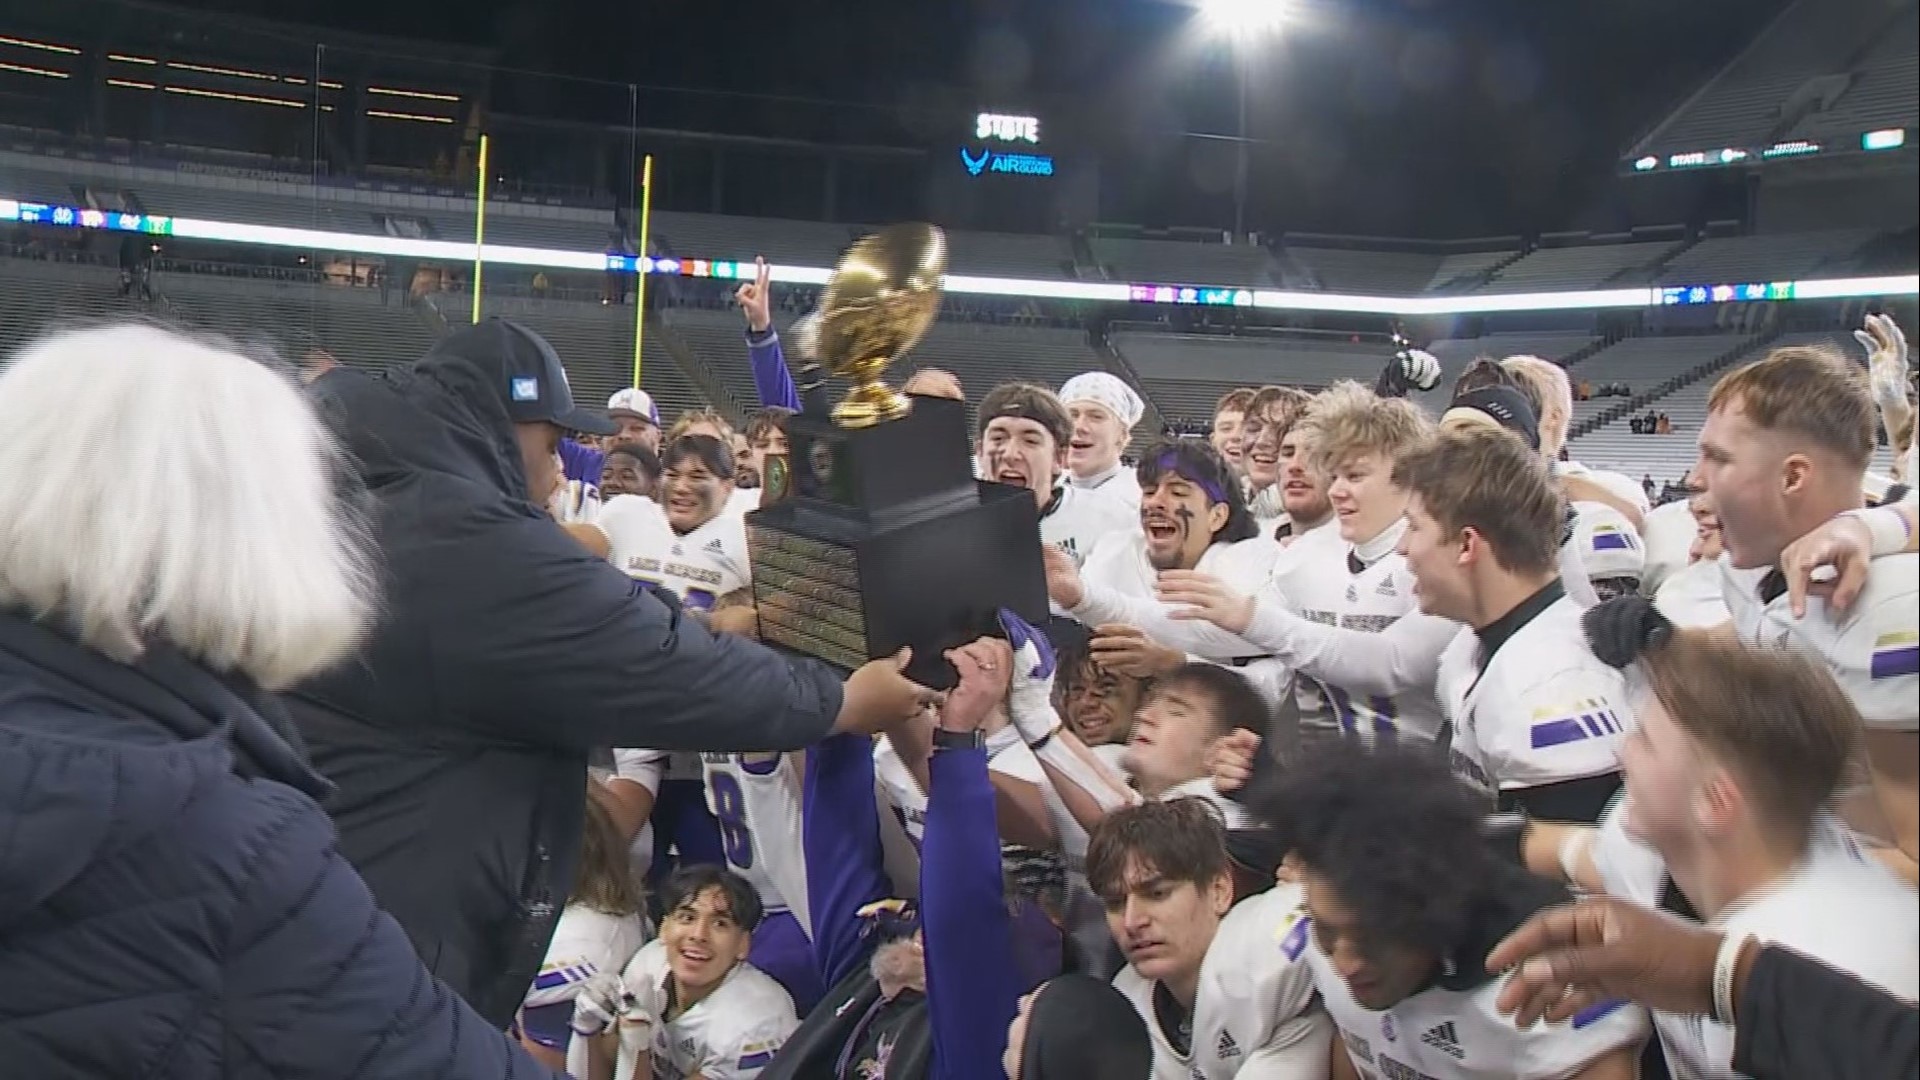 Lake Stevens defeats Graham-Kapowsin 31-6 to win the 4A State High School Football Title.  The win gives the Vikings back-to-back titles.